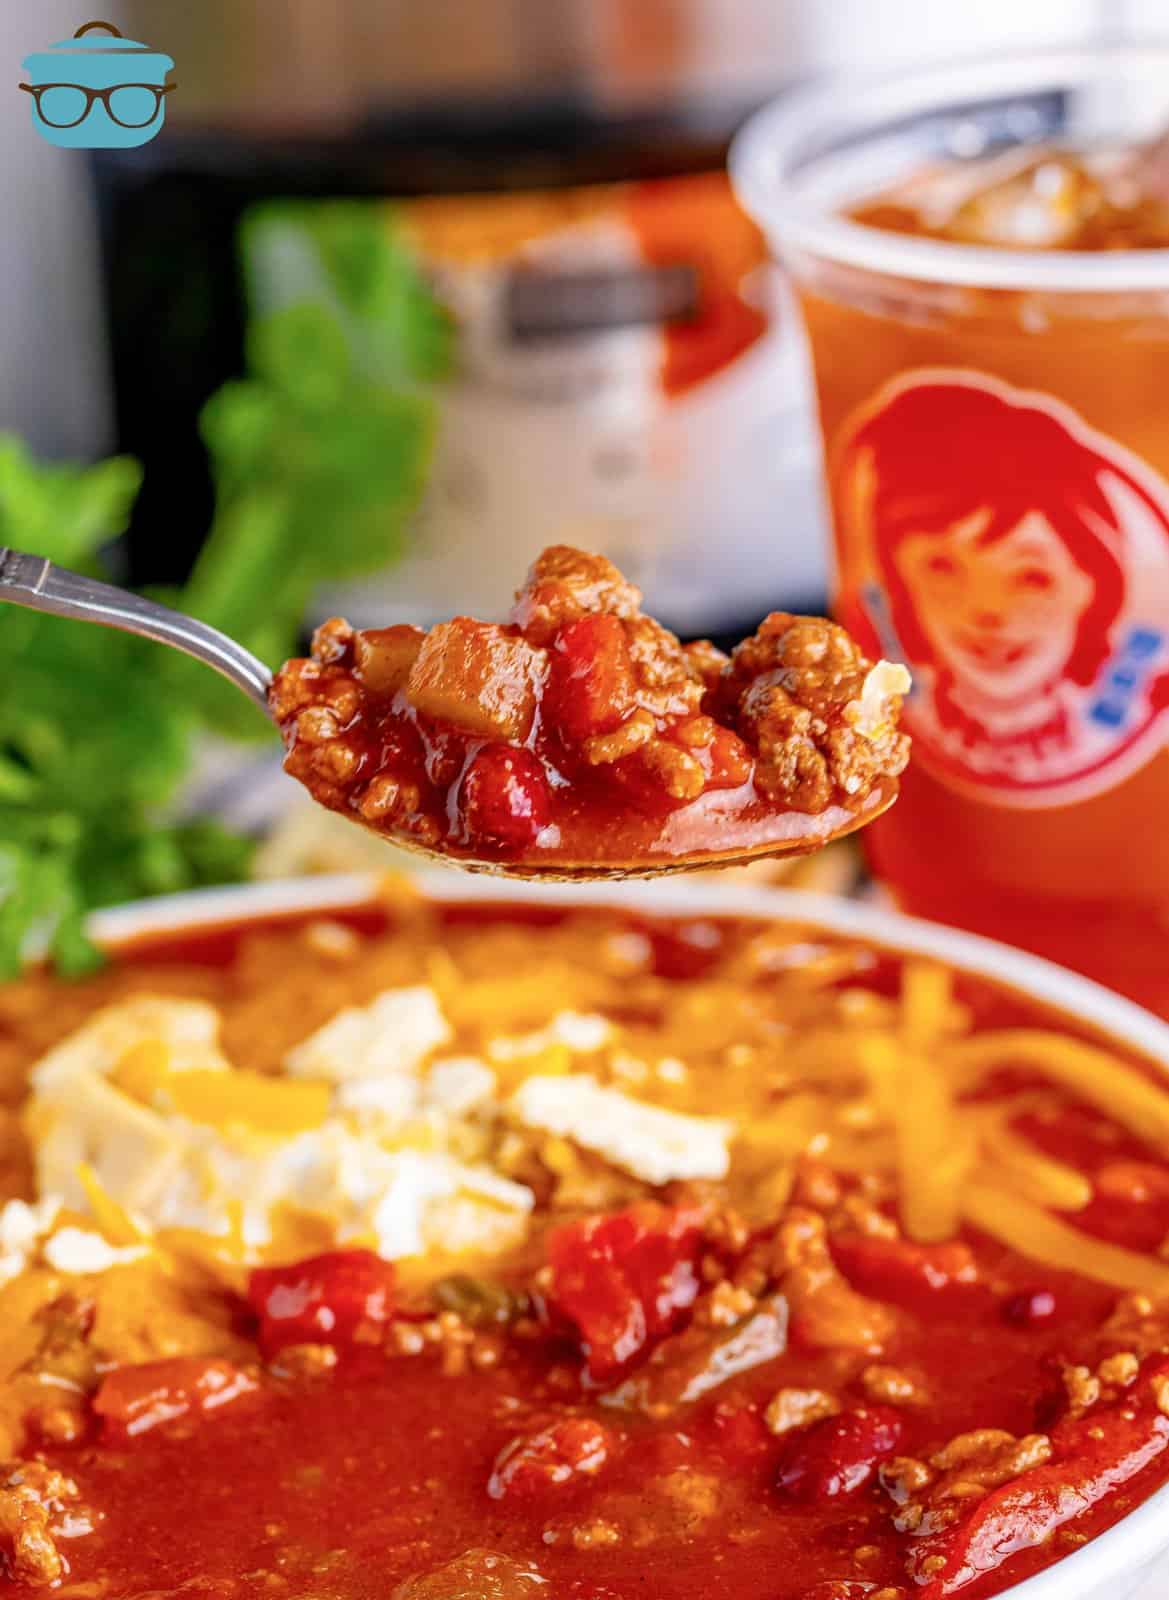 A spoon holding a bite of homemade Wendy's Chili.